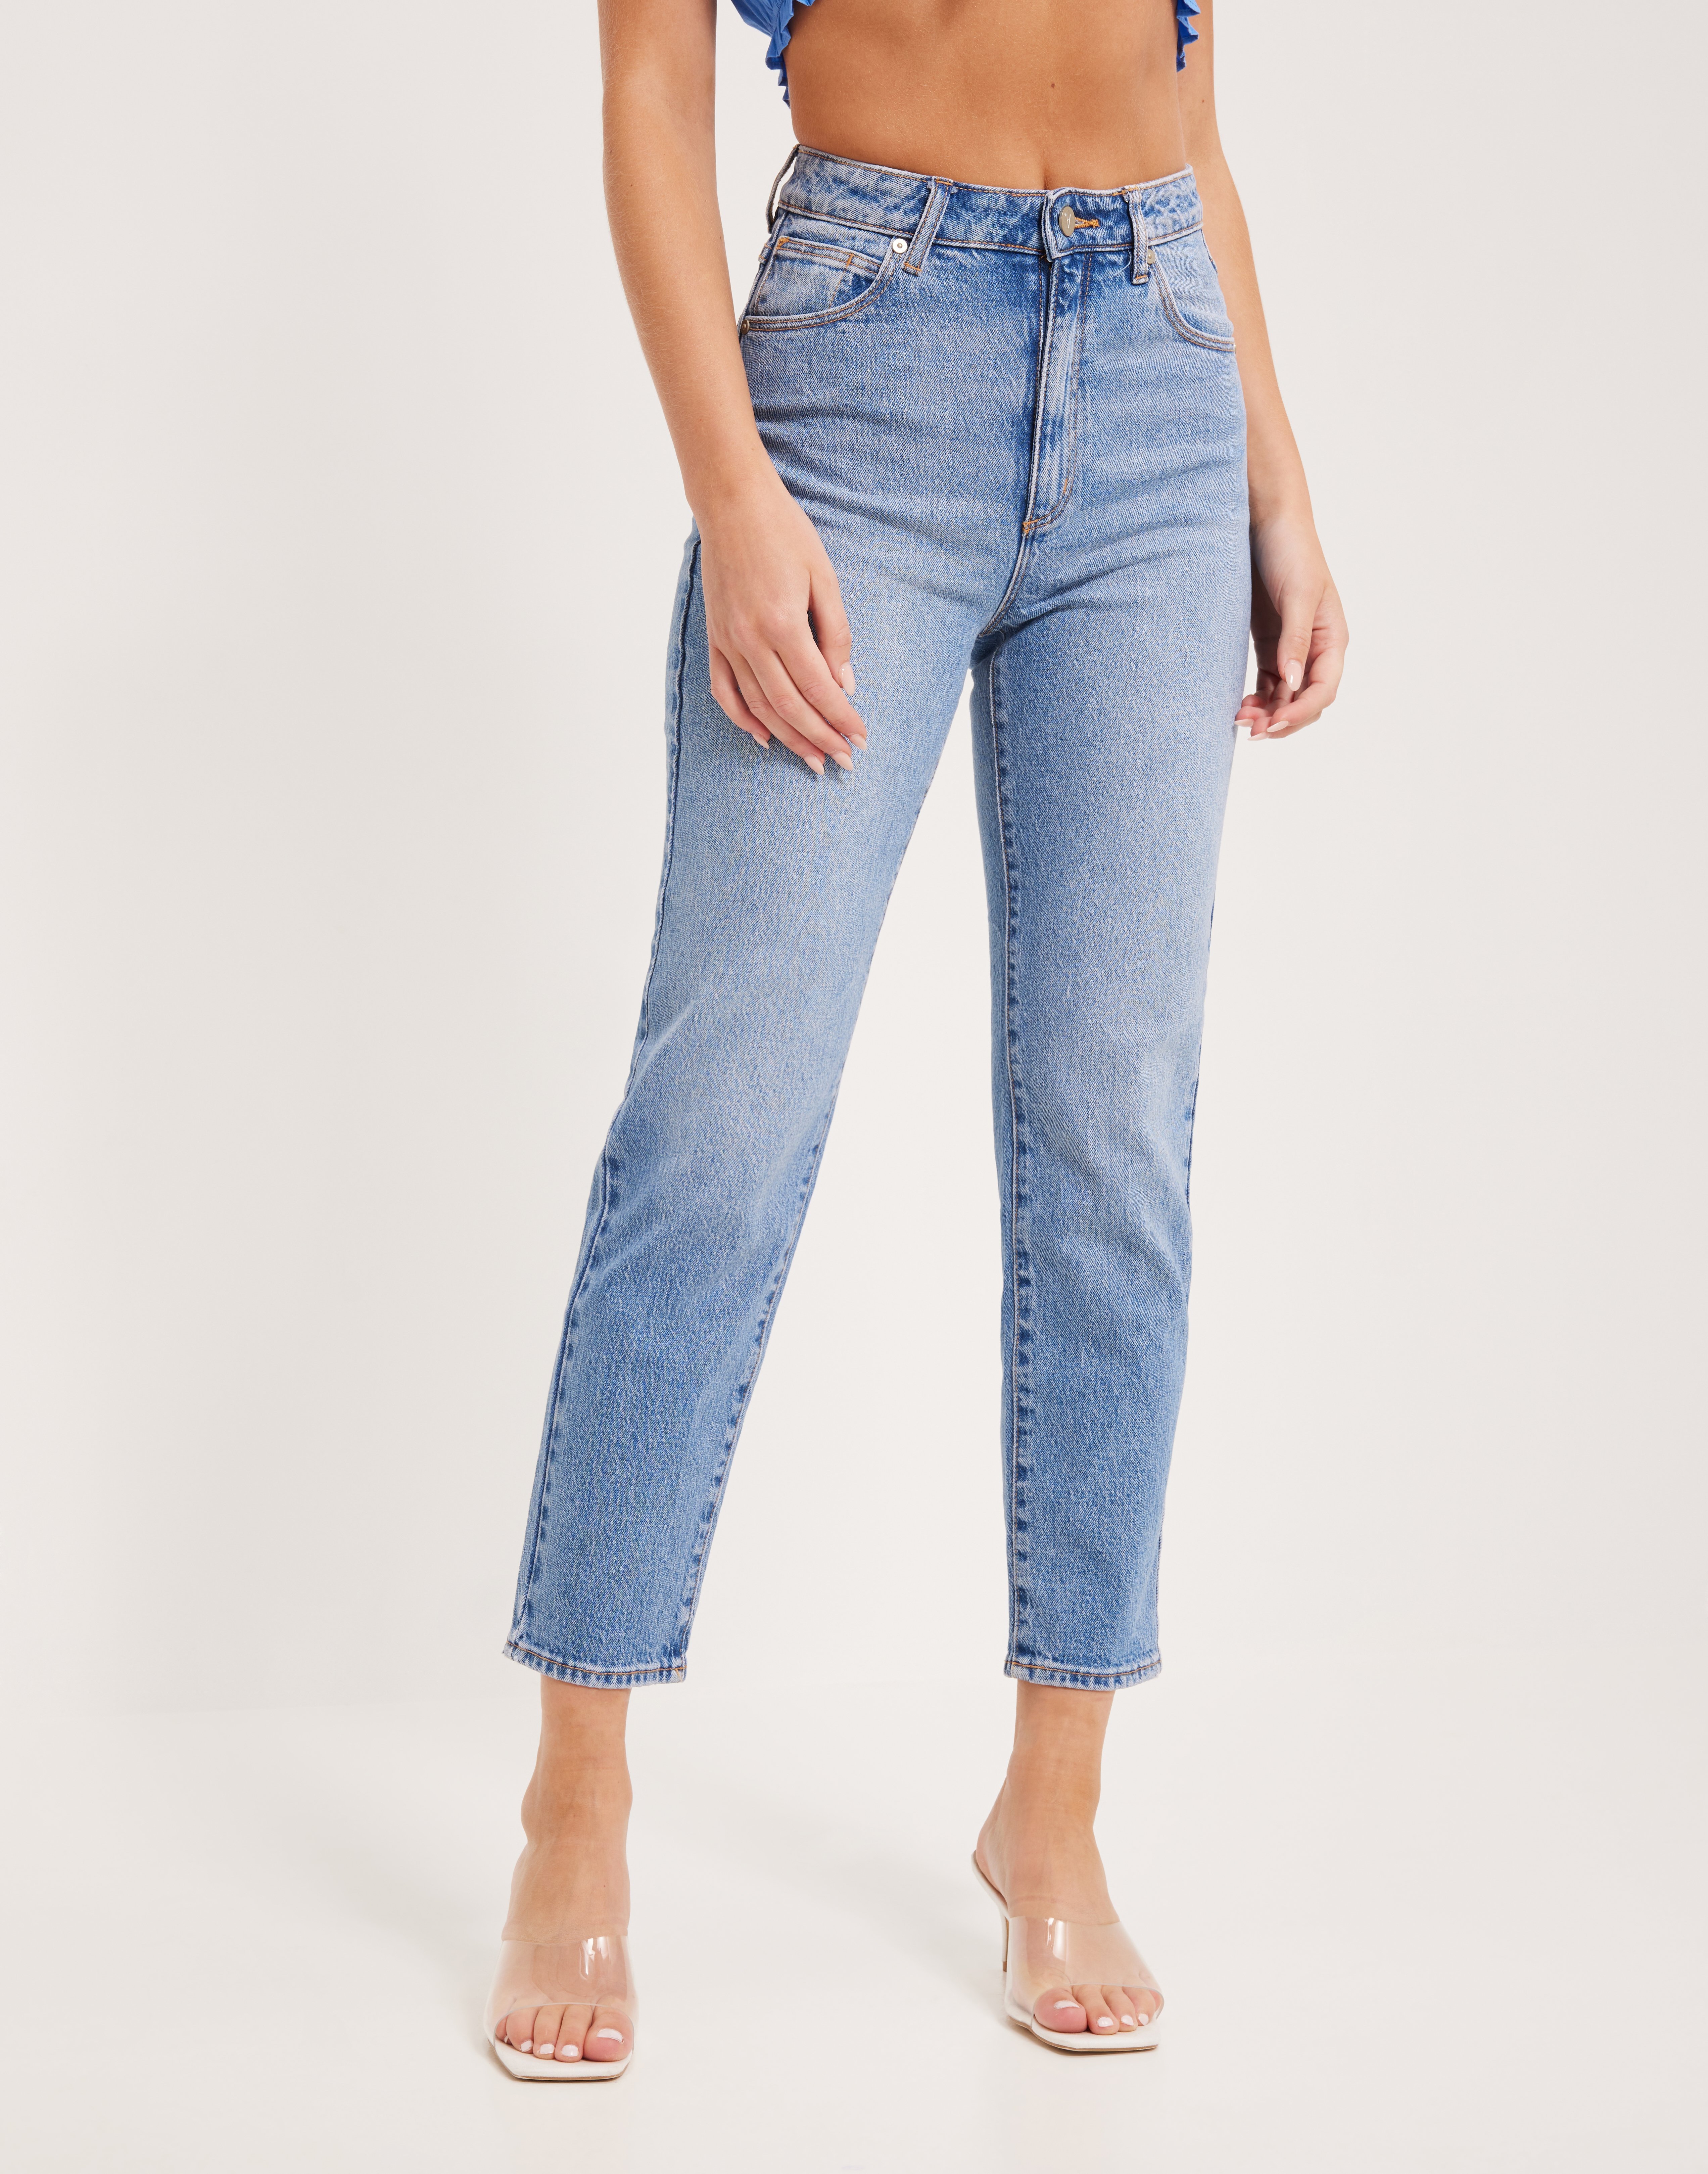 Abrand Jeans - High waisted jeans - A 94 High Slim Bae Town - Jeans